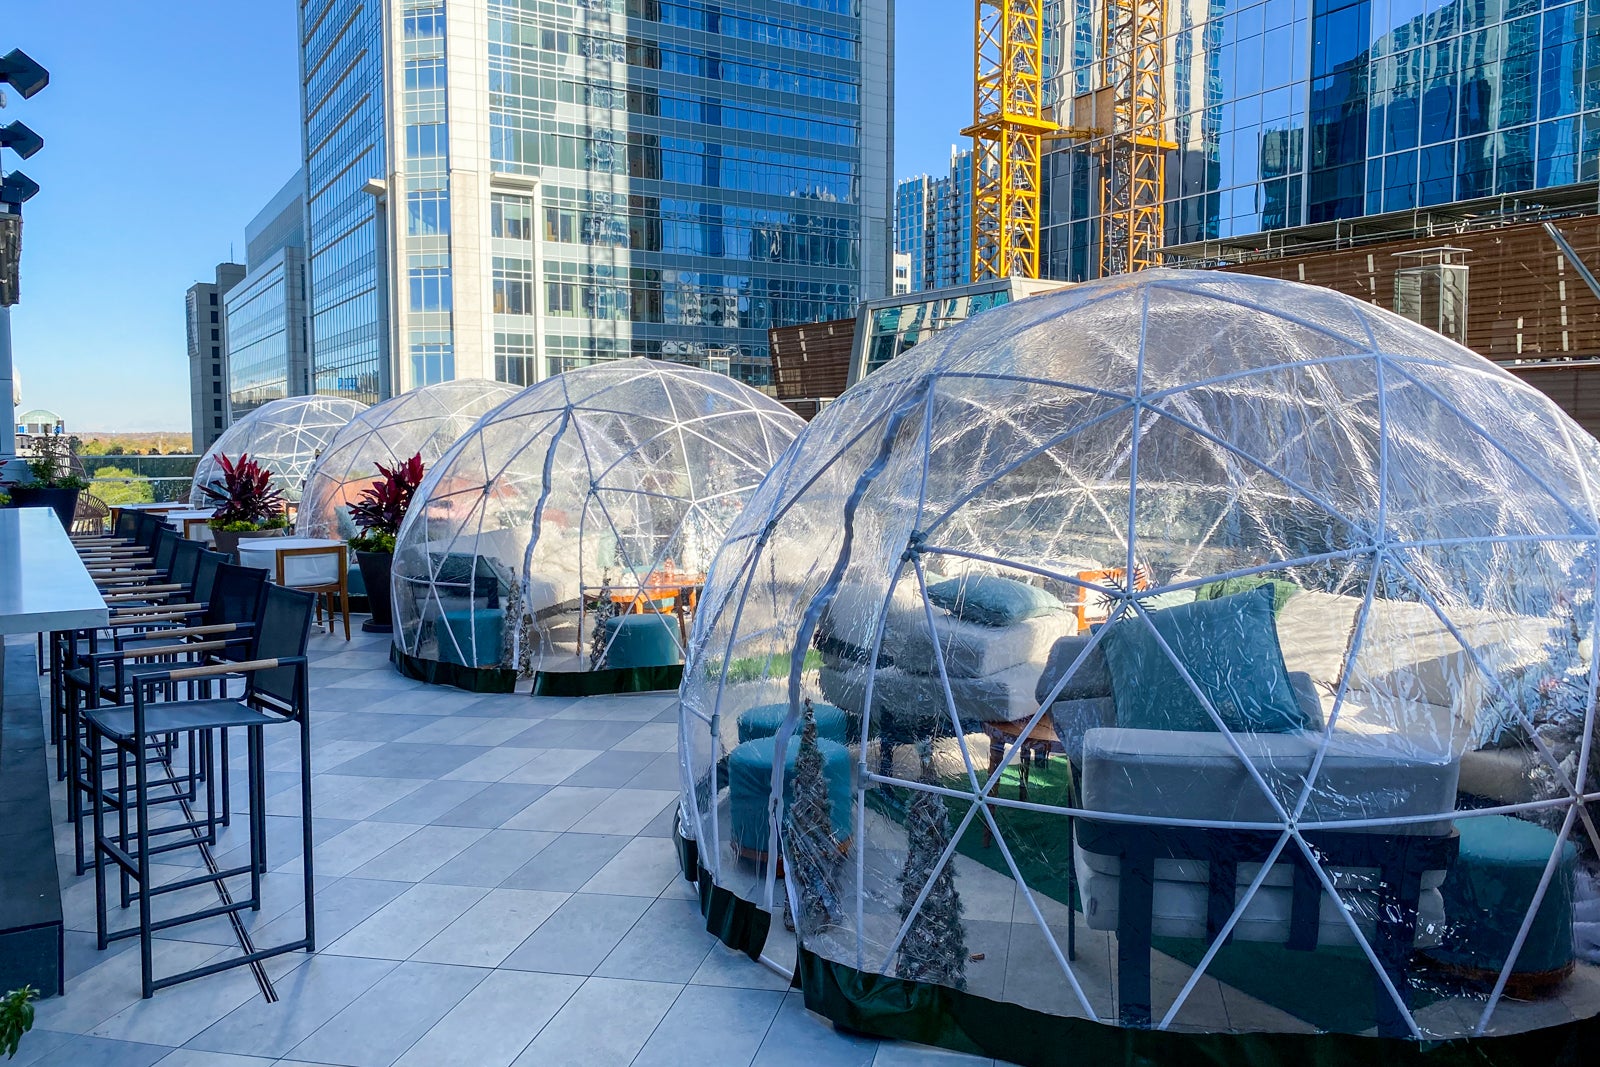 an outdoor seating area where each table is enclosed in a bubble